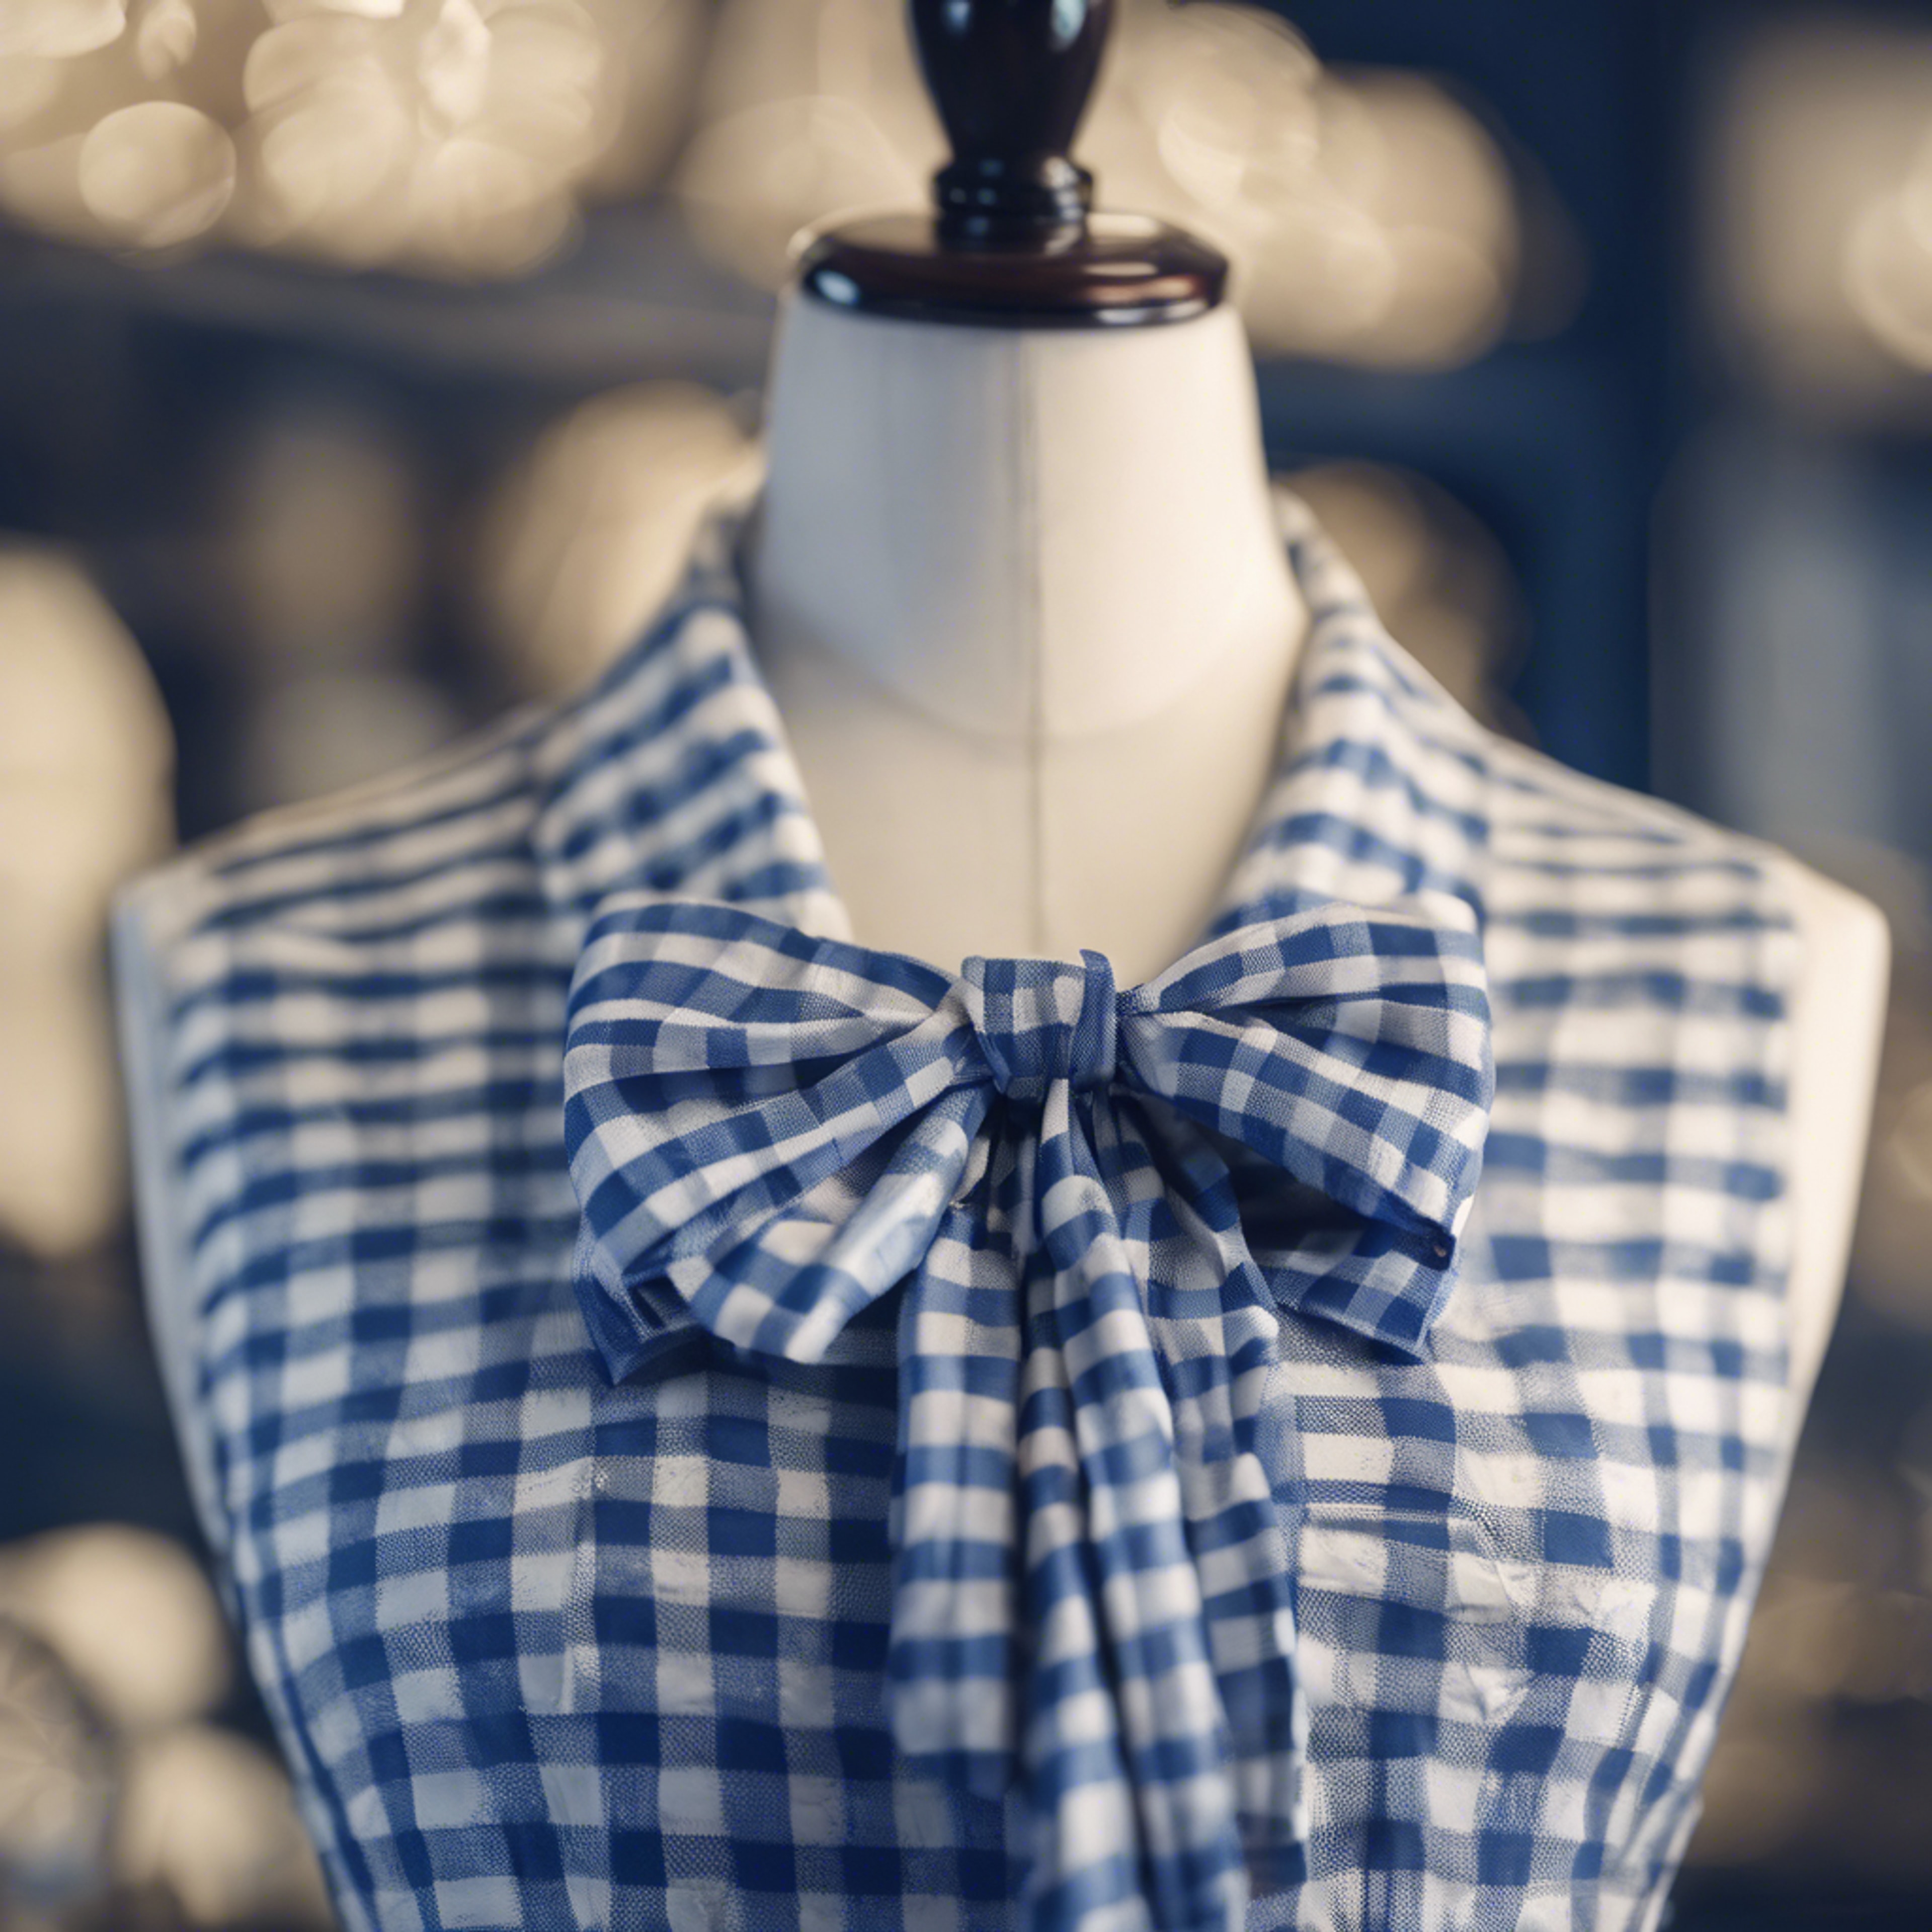 A preppy style blue and white chequered dress with a neatly tied bow on a mannequin.” Tapet[2cff79e4d79d40c780d3]